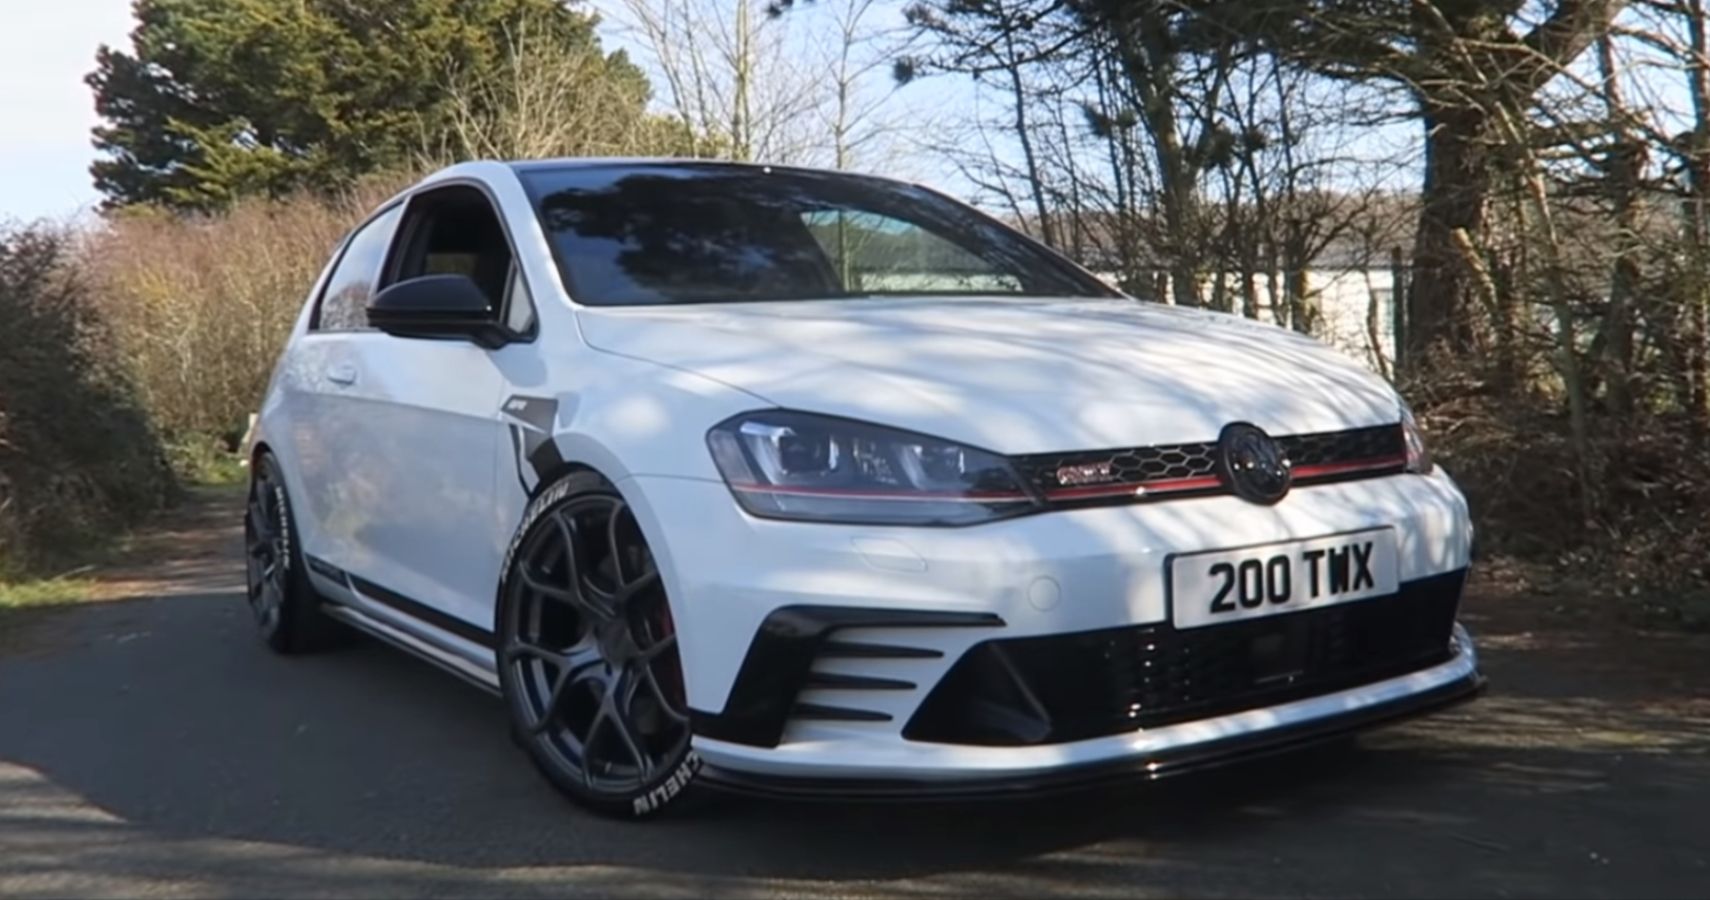 Check Out This Very Well Done Modified Hp Volkswagen Golf Gti Mk